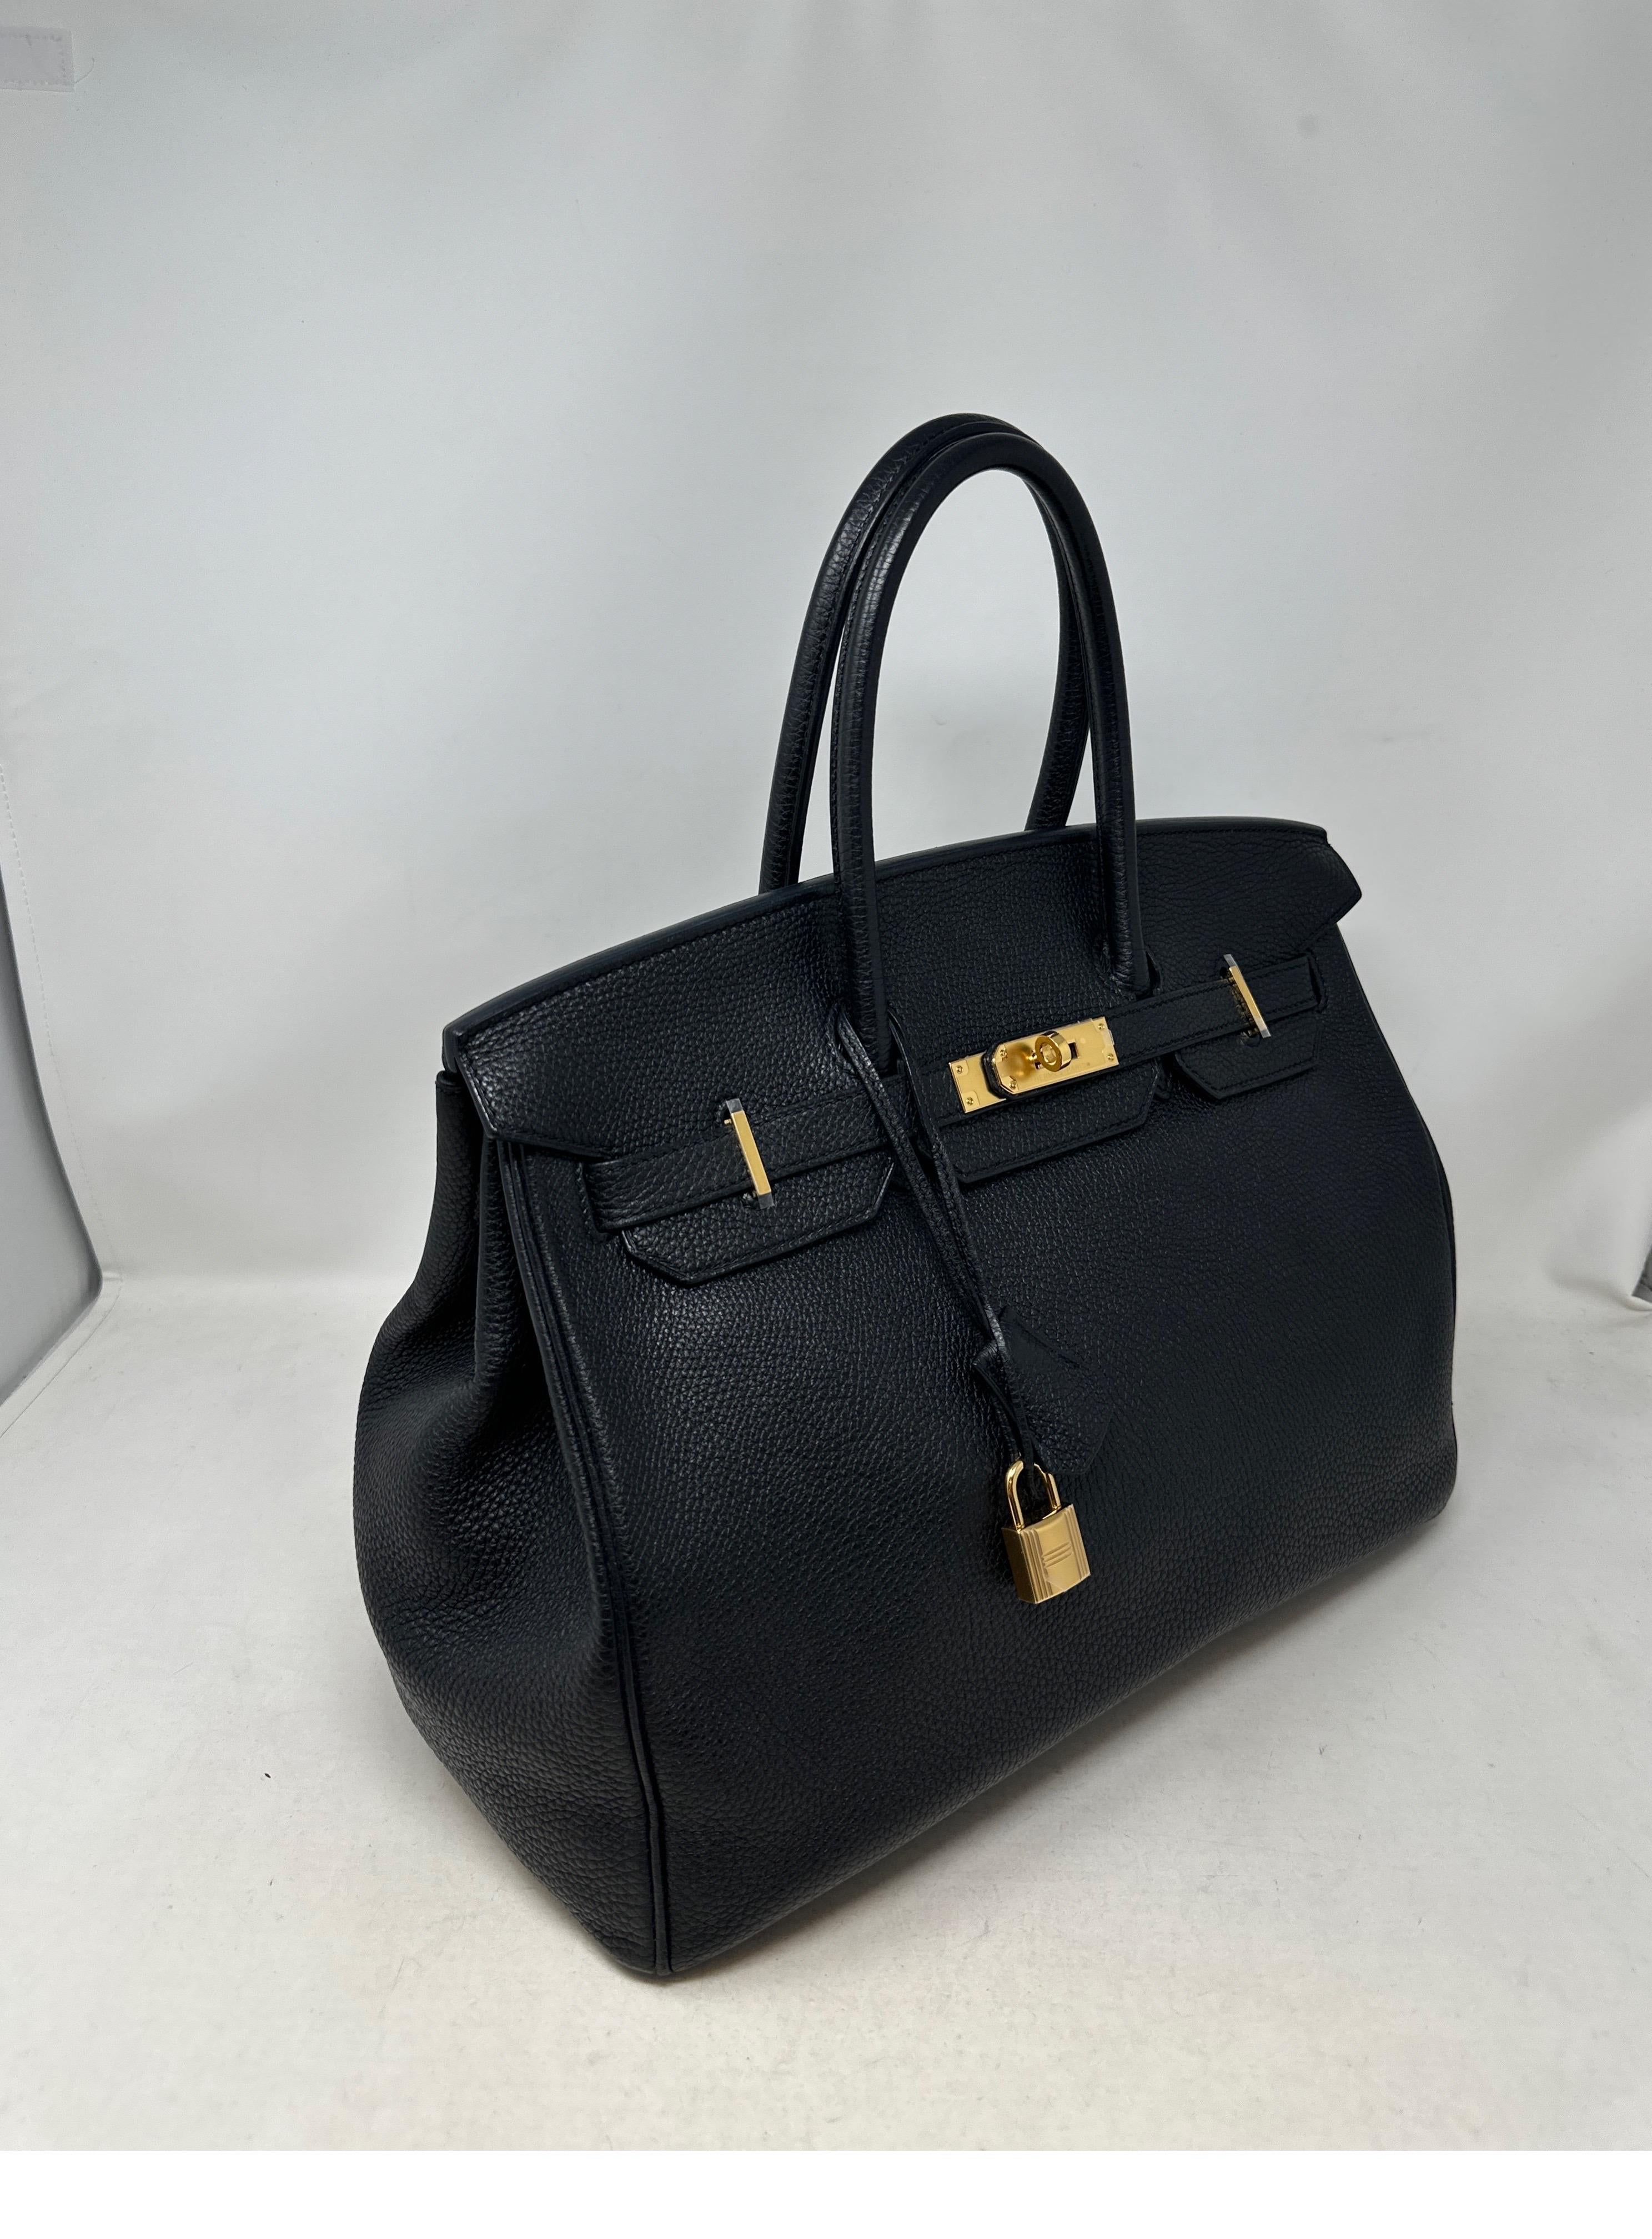 Hermes Black Birkin 35 Bag. Togo leather. Excellent condition. Gold hardware. Plastic is still on the hardware. Interior is clean. The bag looks like new condition. The most wanted combination. Black with gold hardware. Great investment bag.